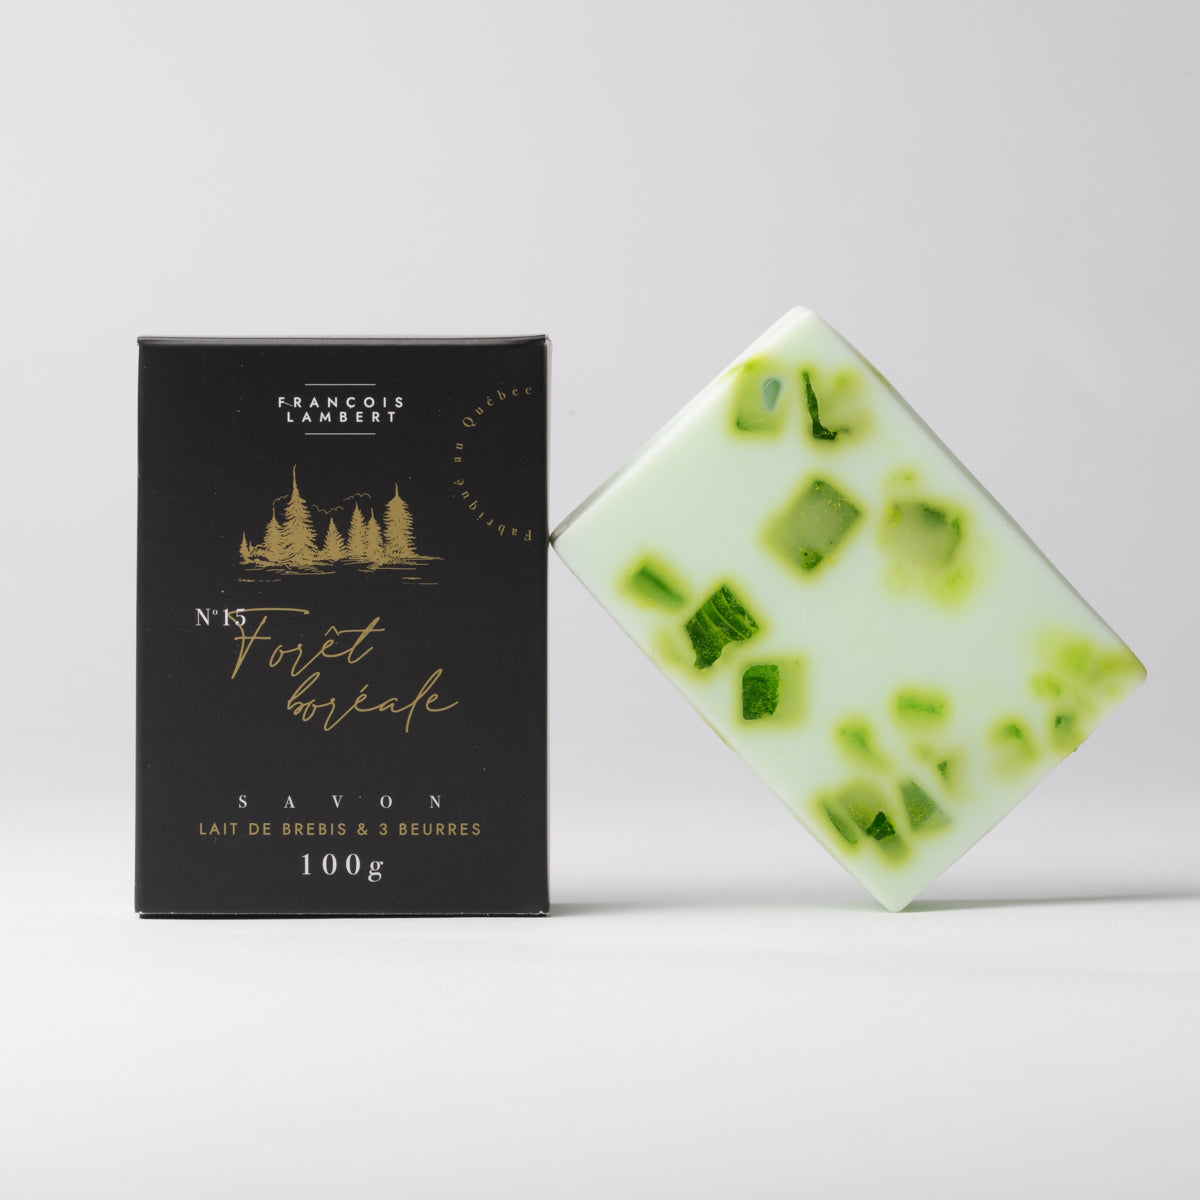 No. 15 Sheep's milk soap - Boreal forest